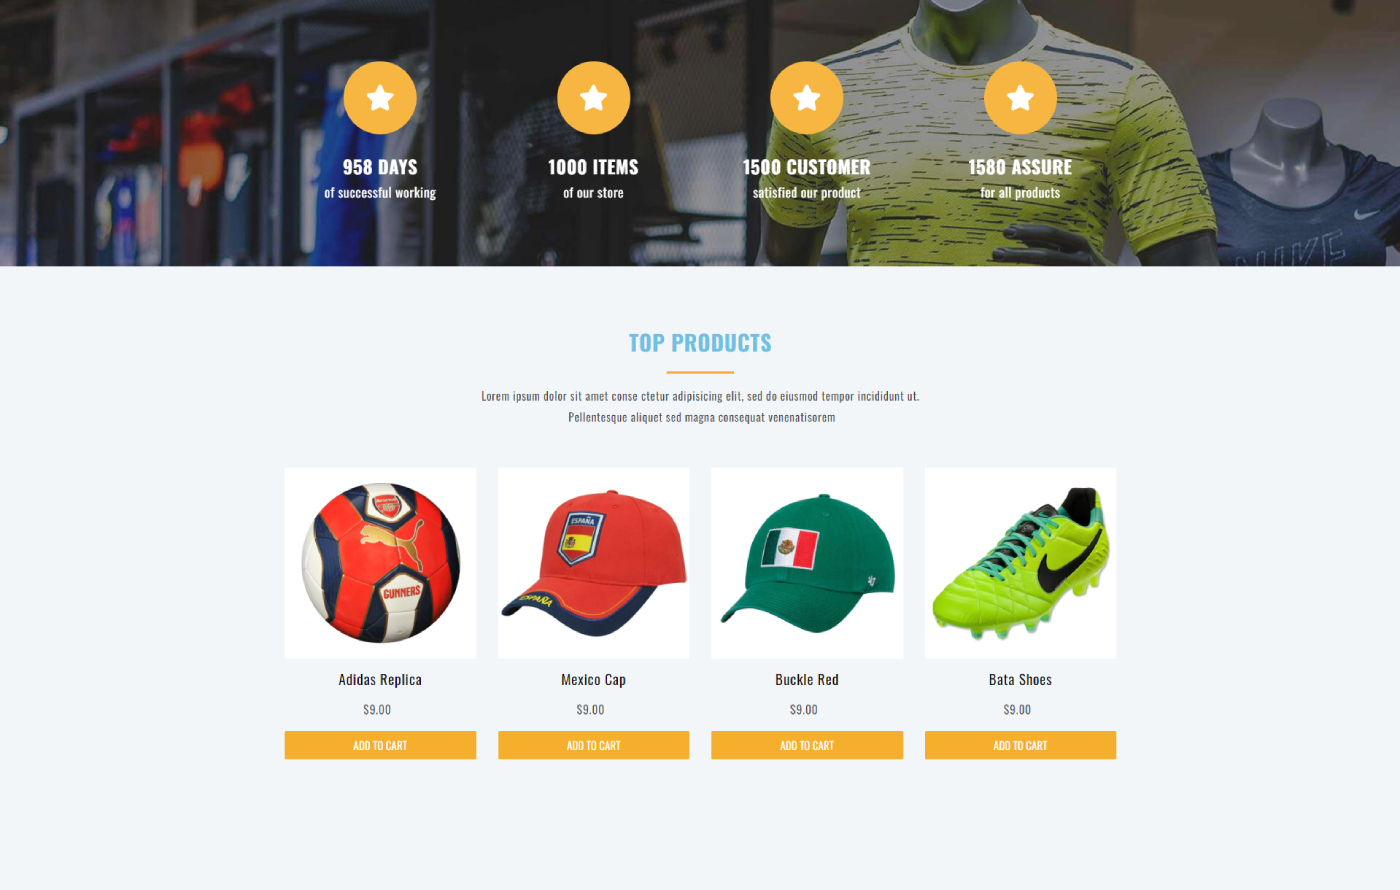 Soccerify - Free Sport Shopify template built by Pagefly